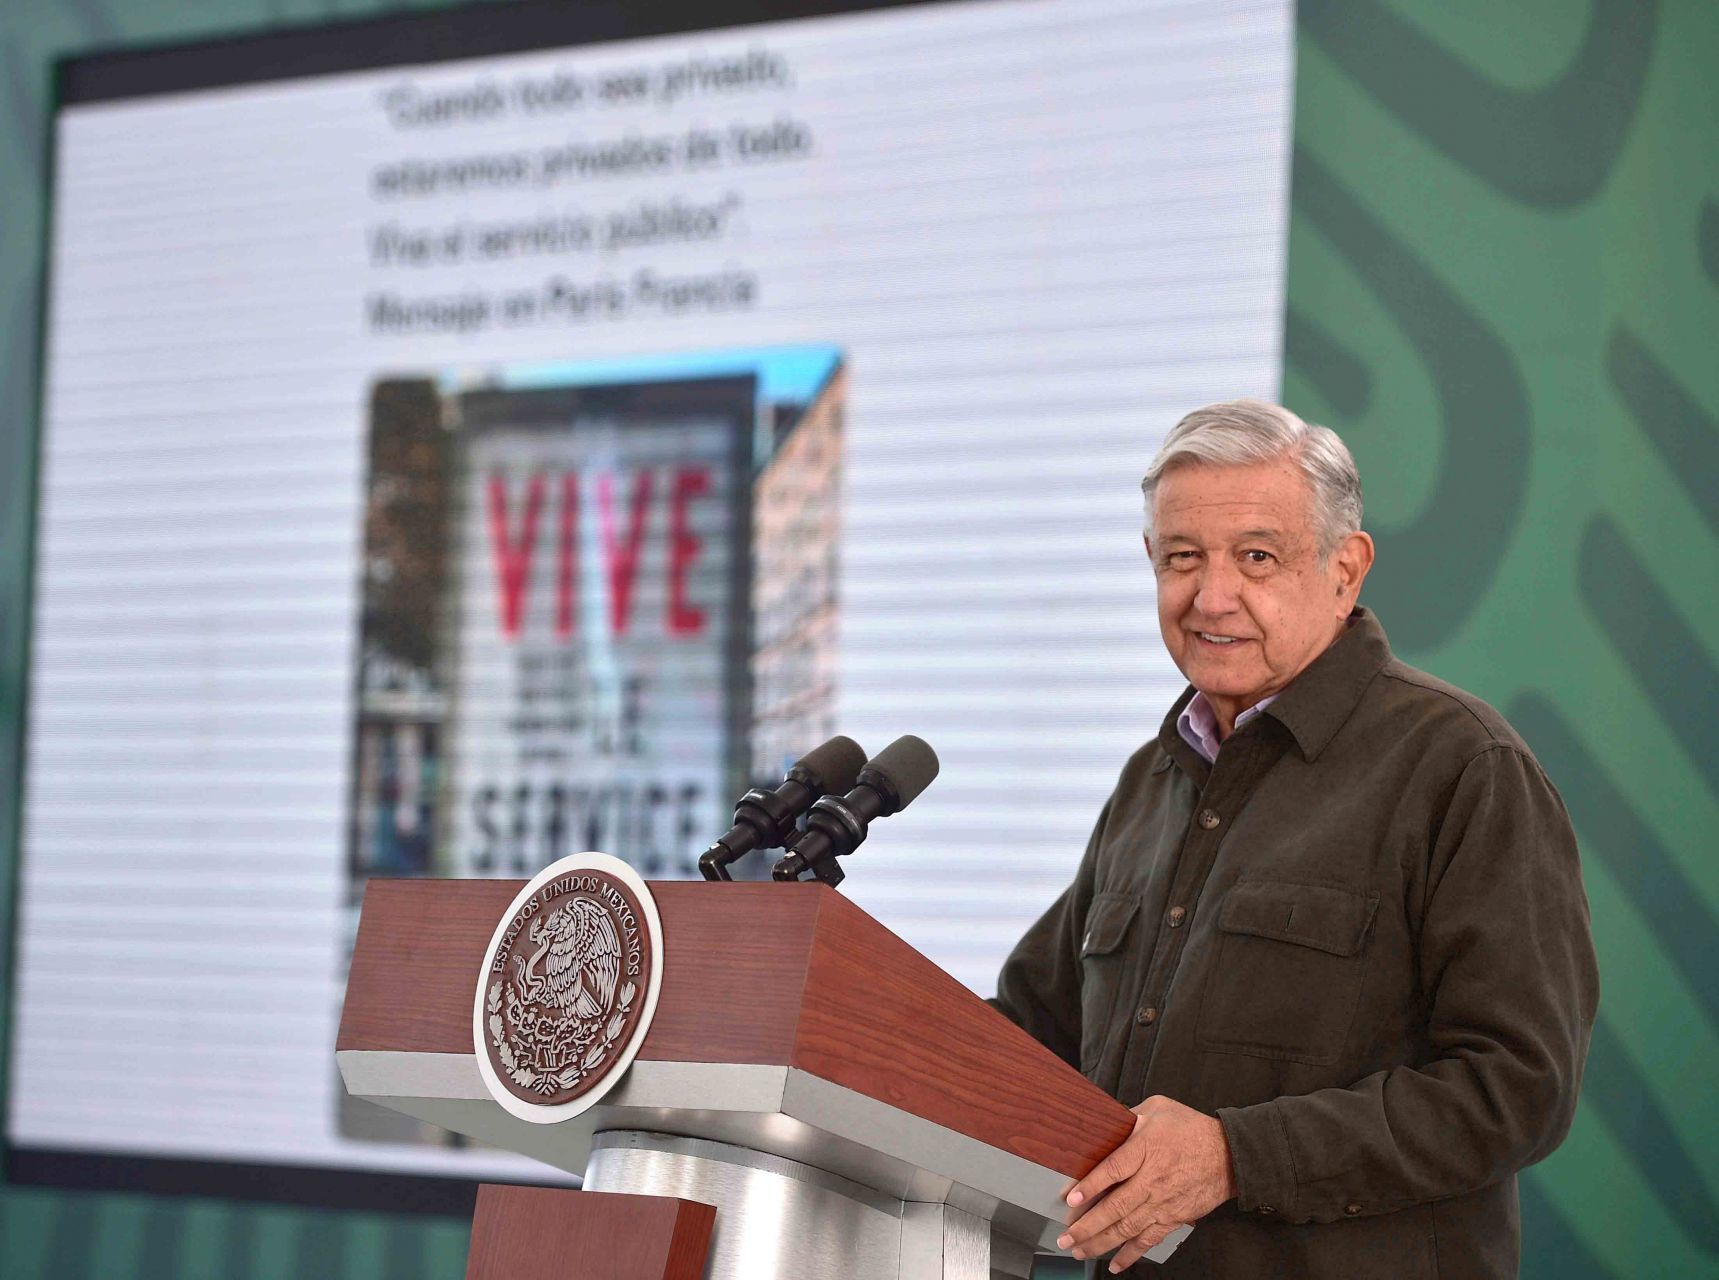 AMLO accuses that CIDE was "right-wing" as the UNAM